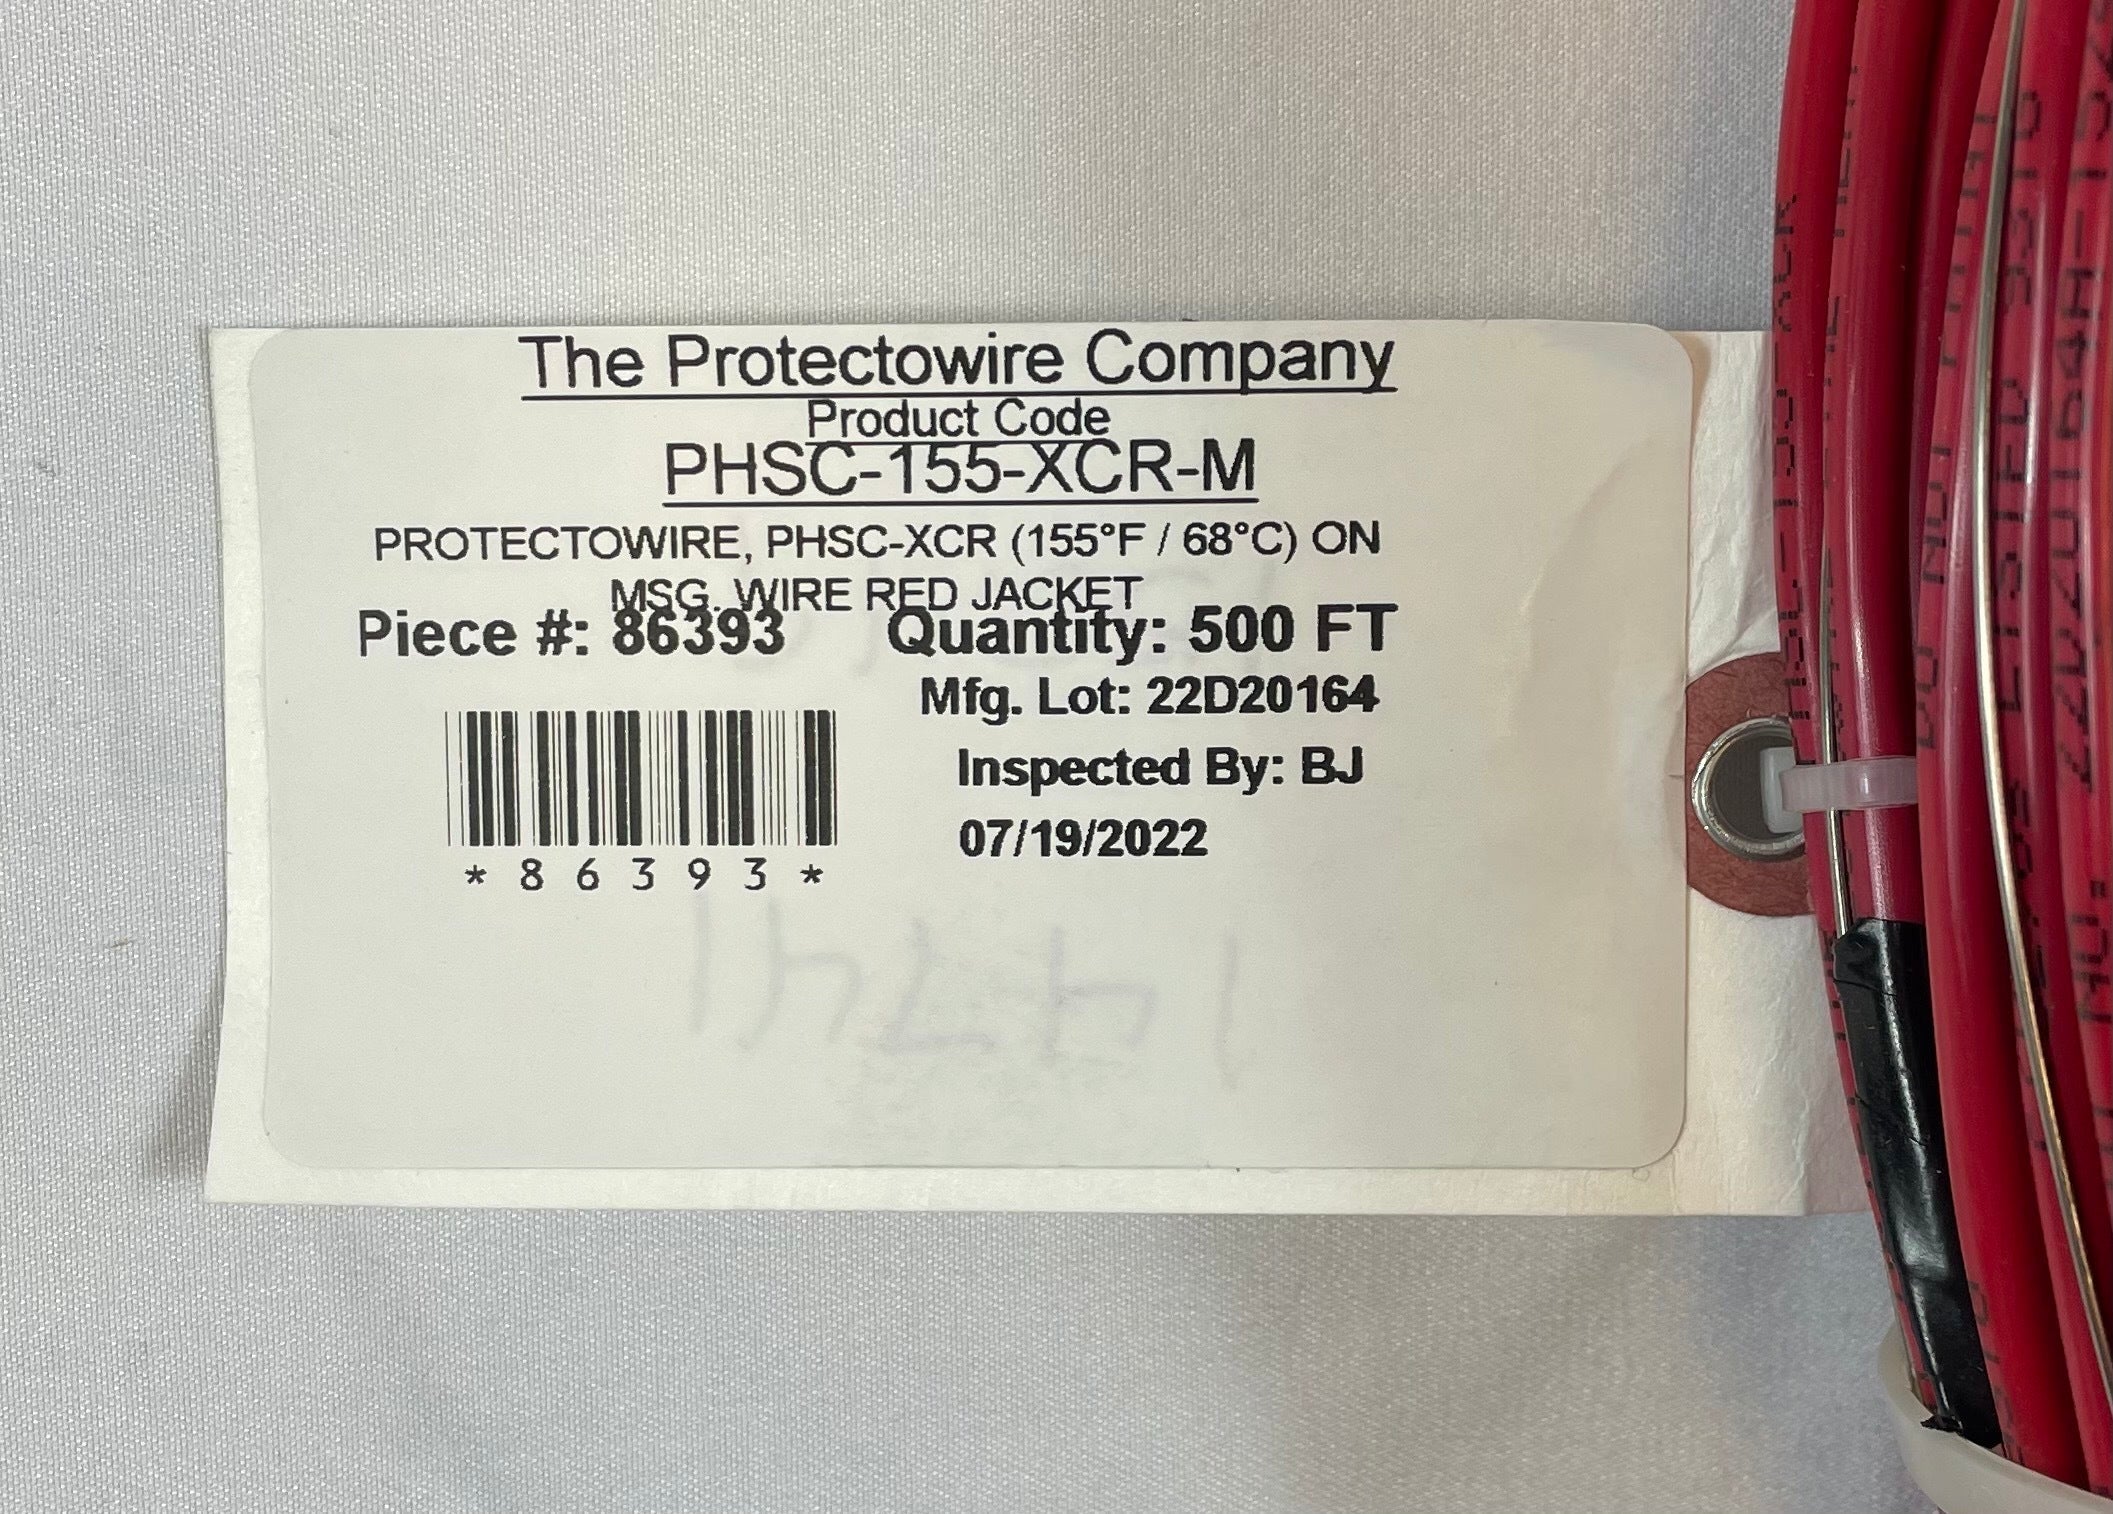 Protectowire PHSC-155-XCR-M 500 Ft